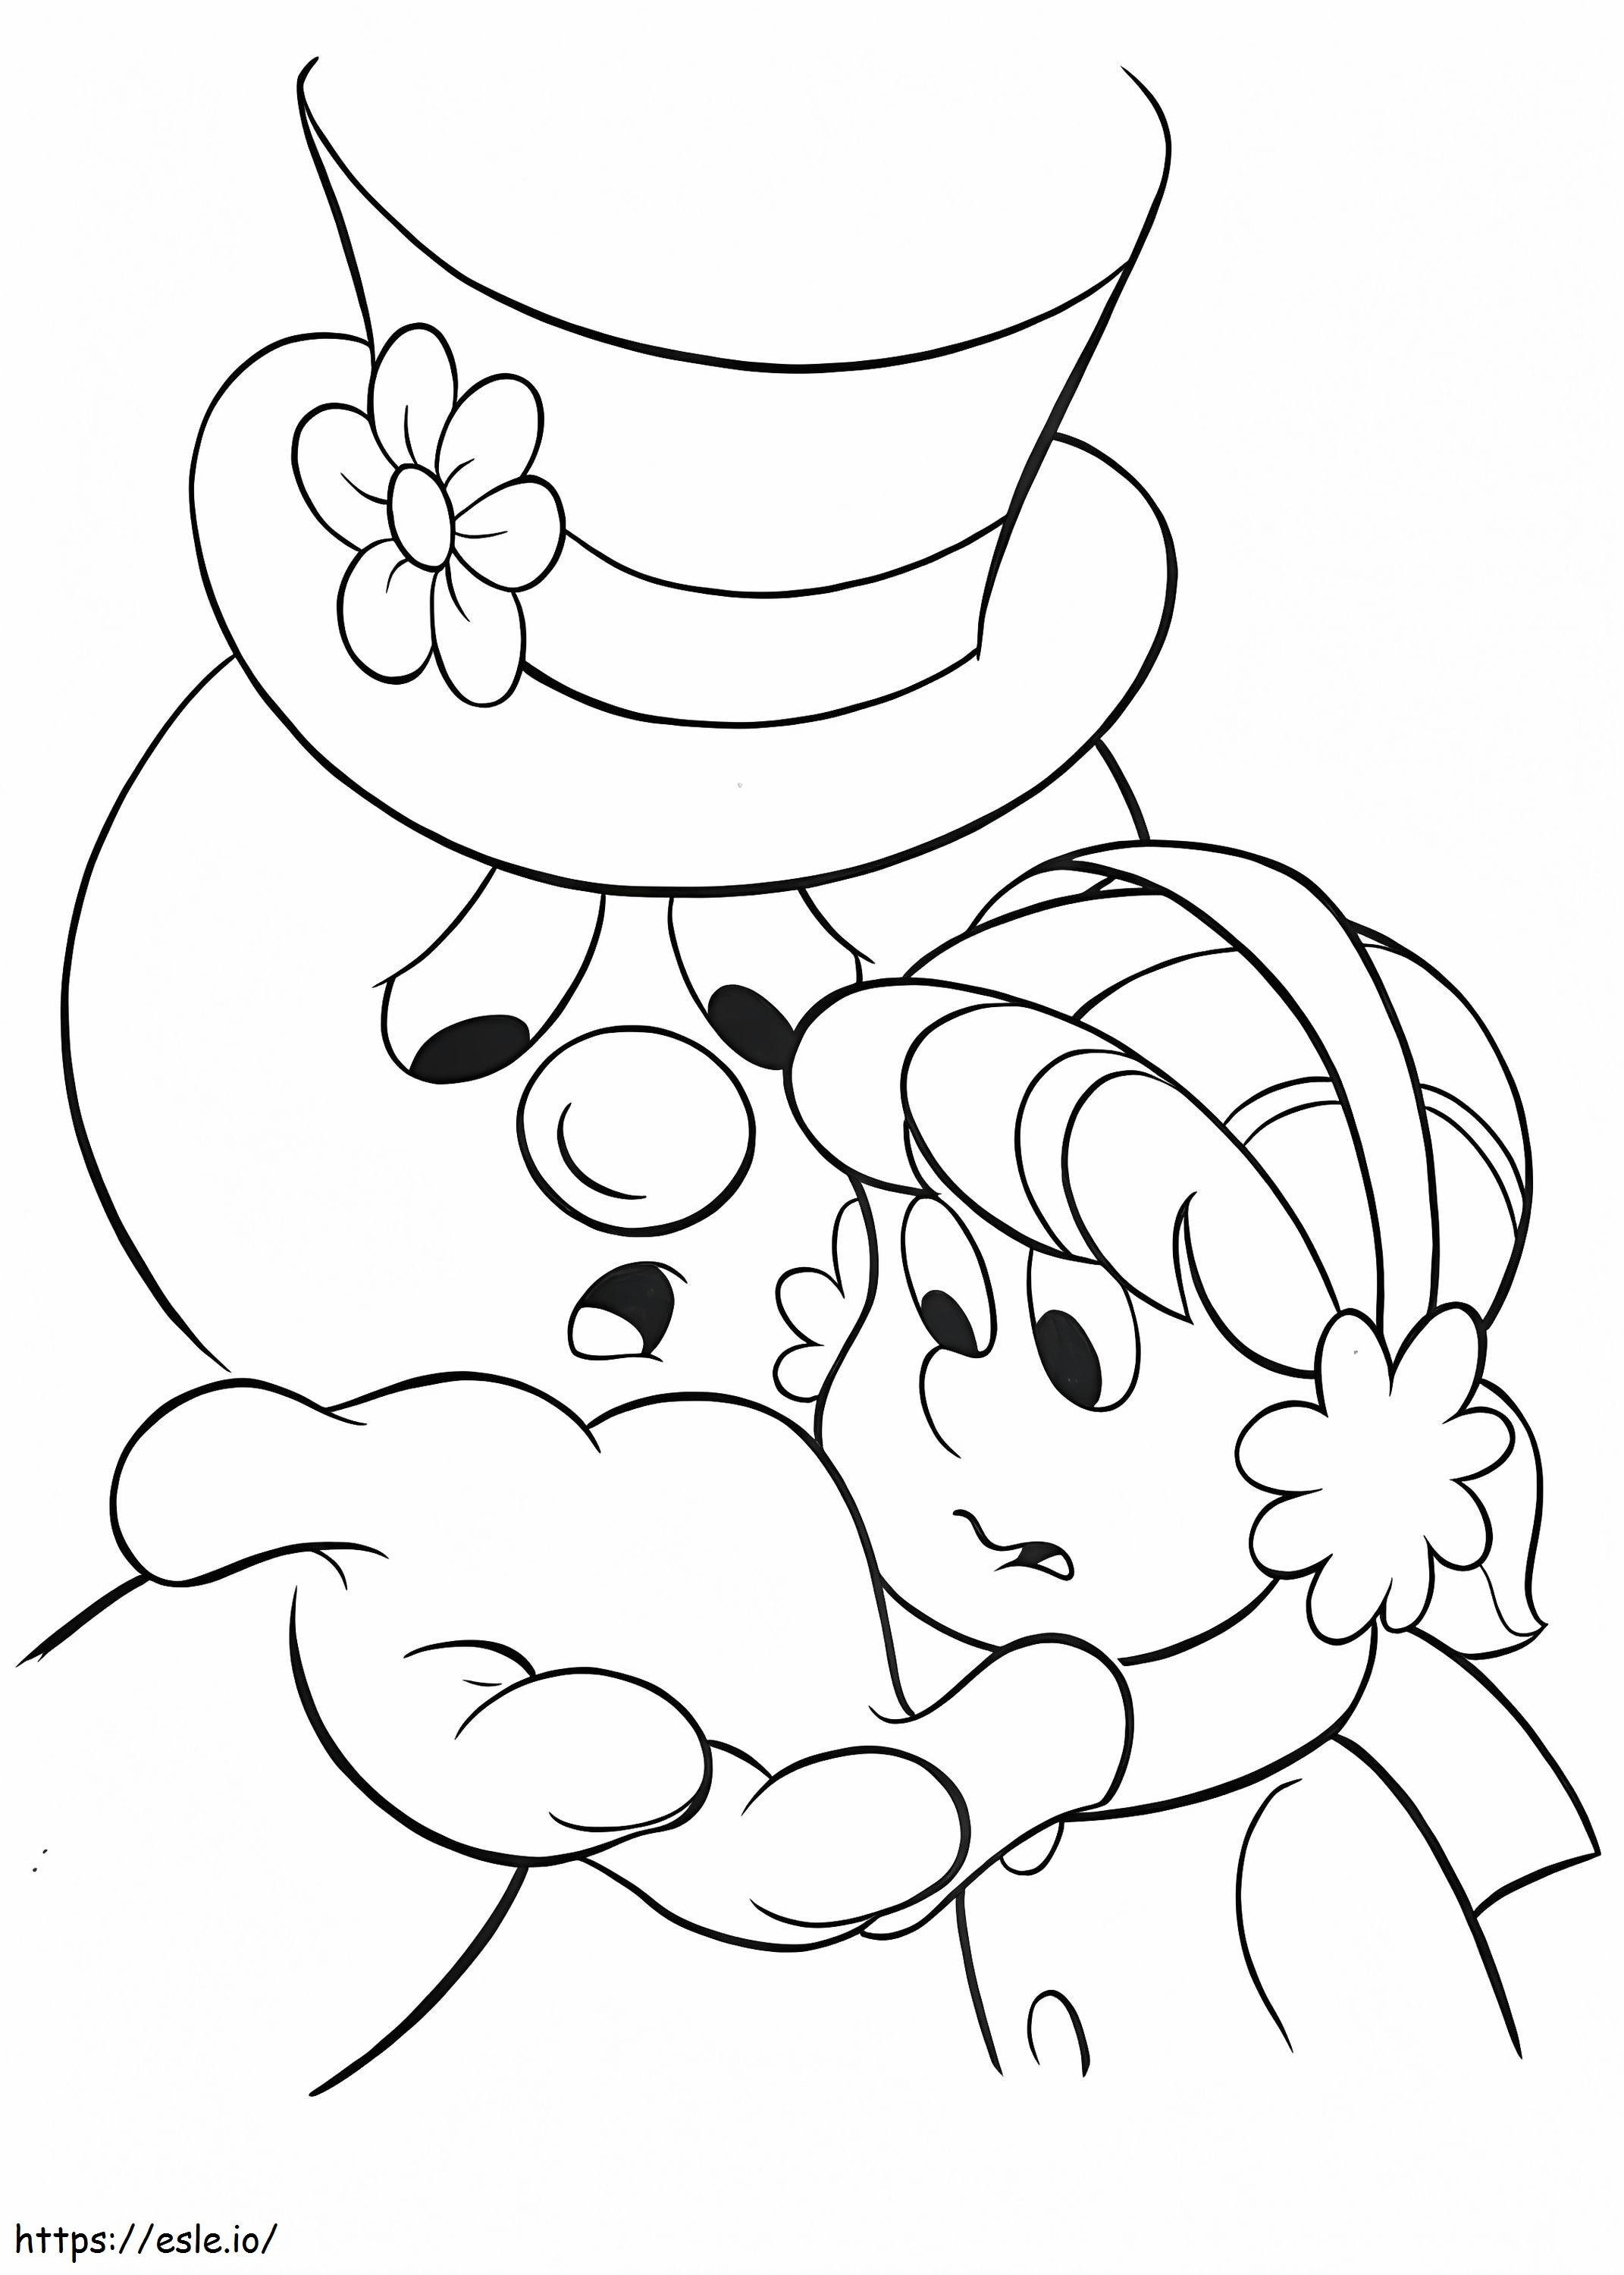 1535706462 Sad Frosty A4 coloring page